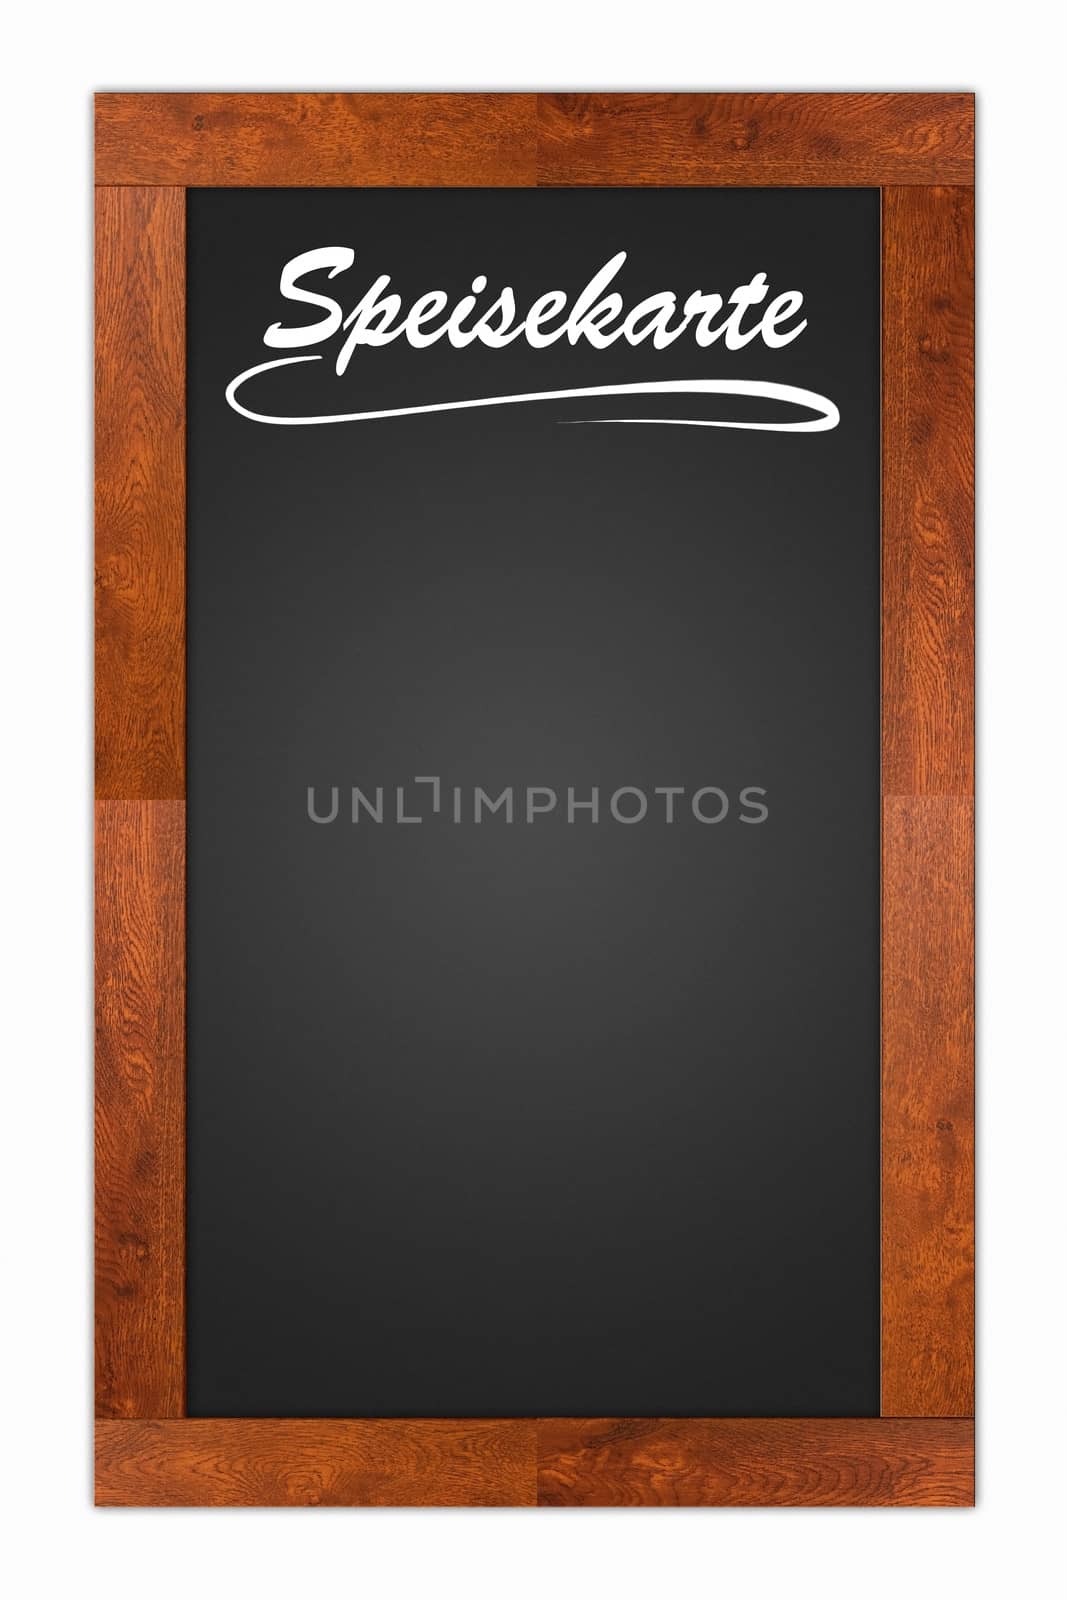 "Speisekarte" (Menu) written on a blank blackboard with wooden frame isolated on white background